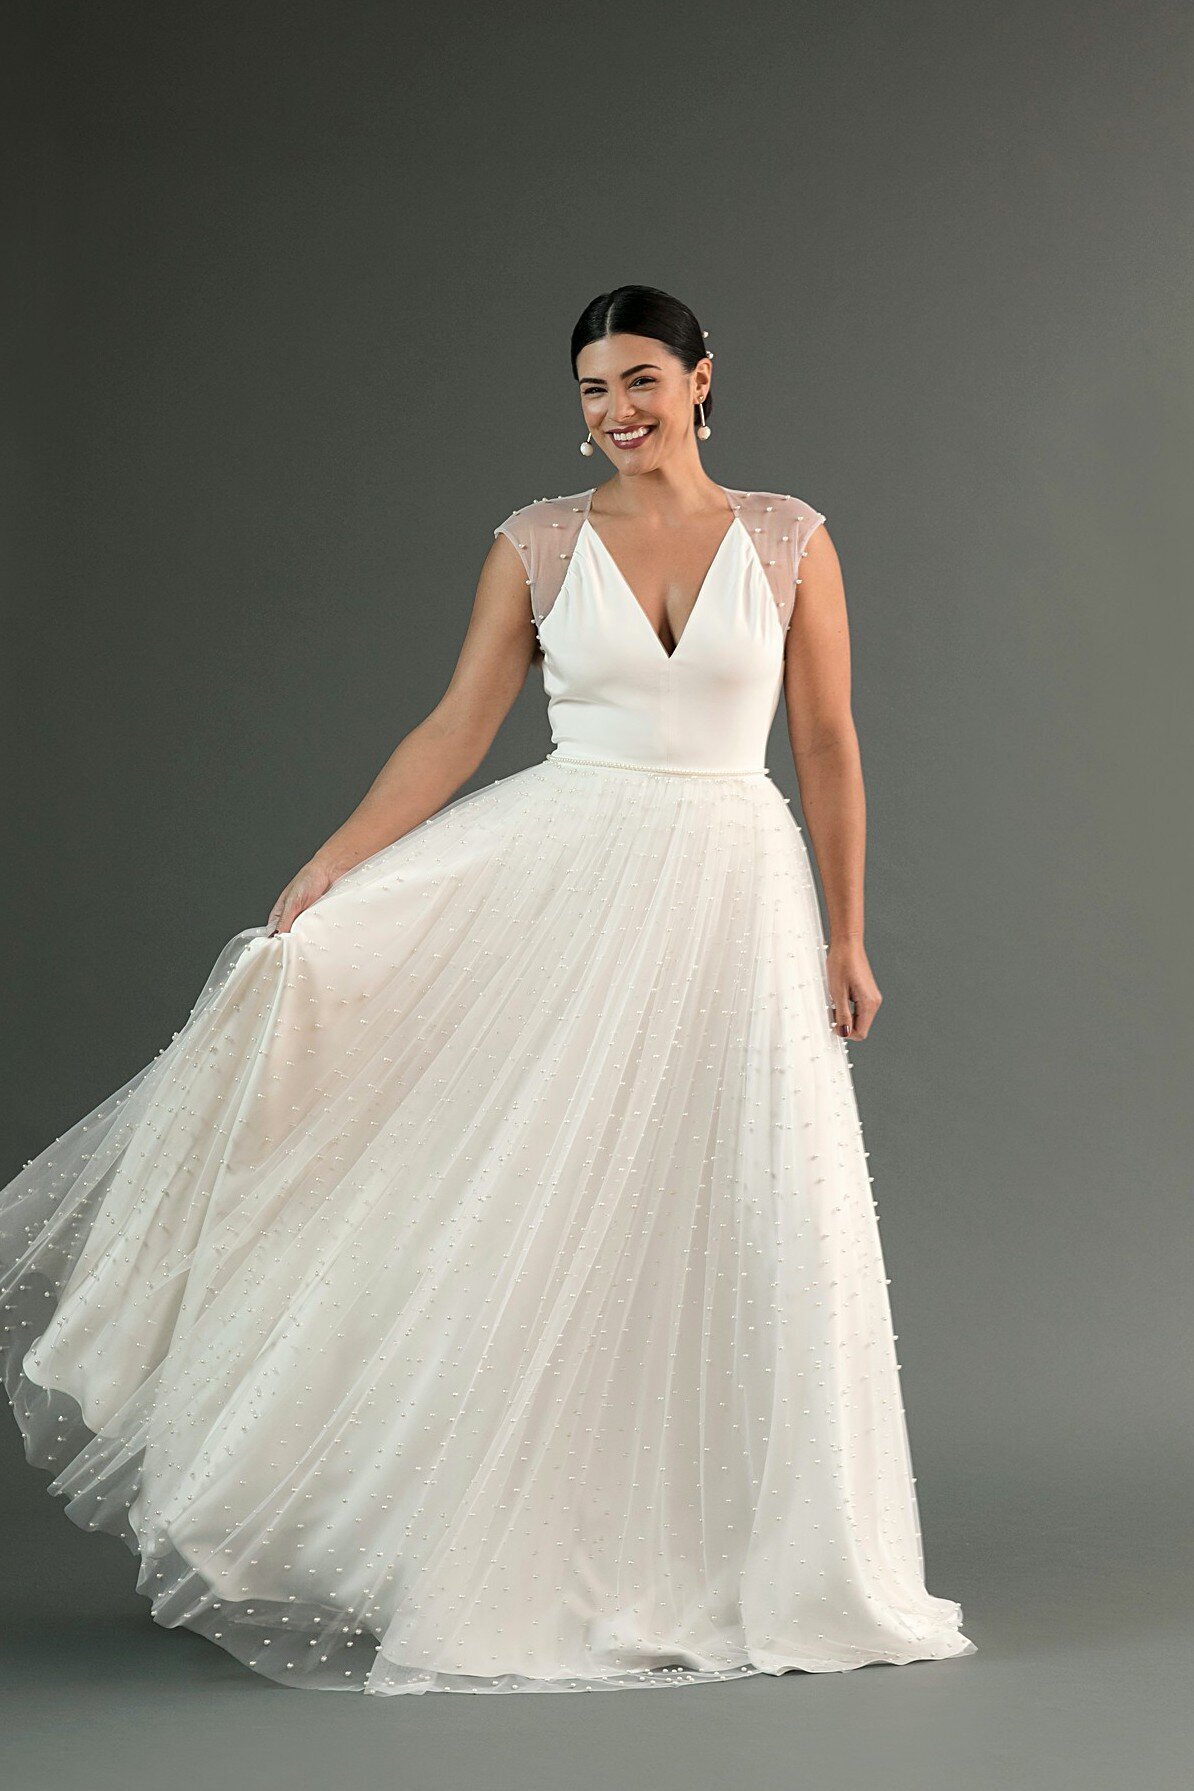 The Chika bridal style by indie bridal designer Edith Elan is an a-line crepe and pearl wedding dress.